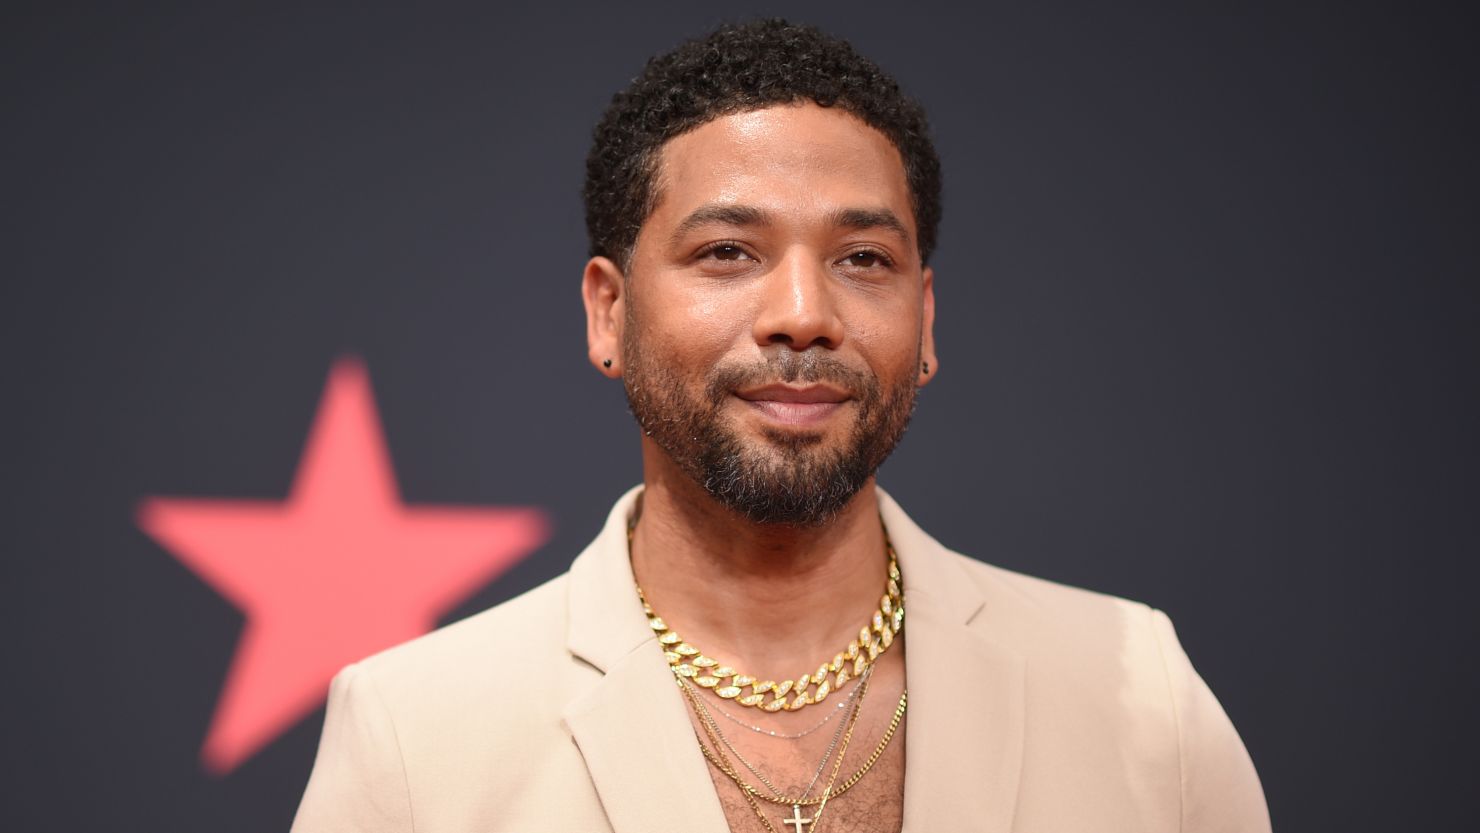 Jussie Smollett Appeals To Illinois Supreme Court Over Prosecution Deal